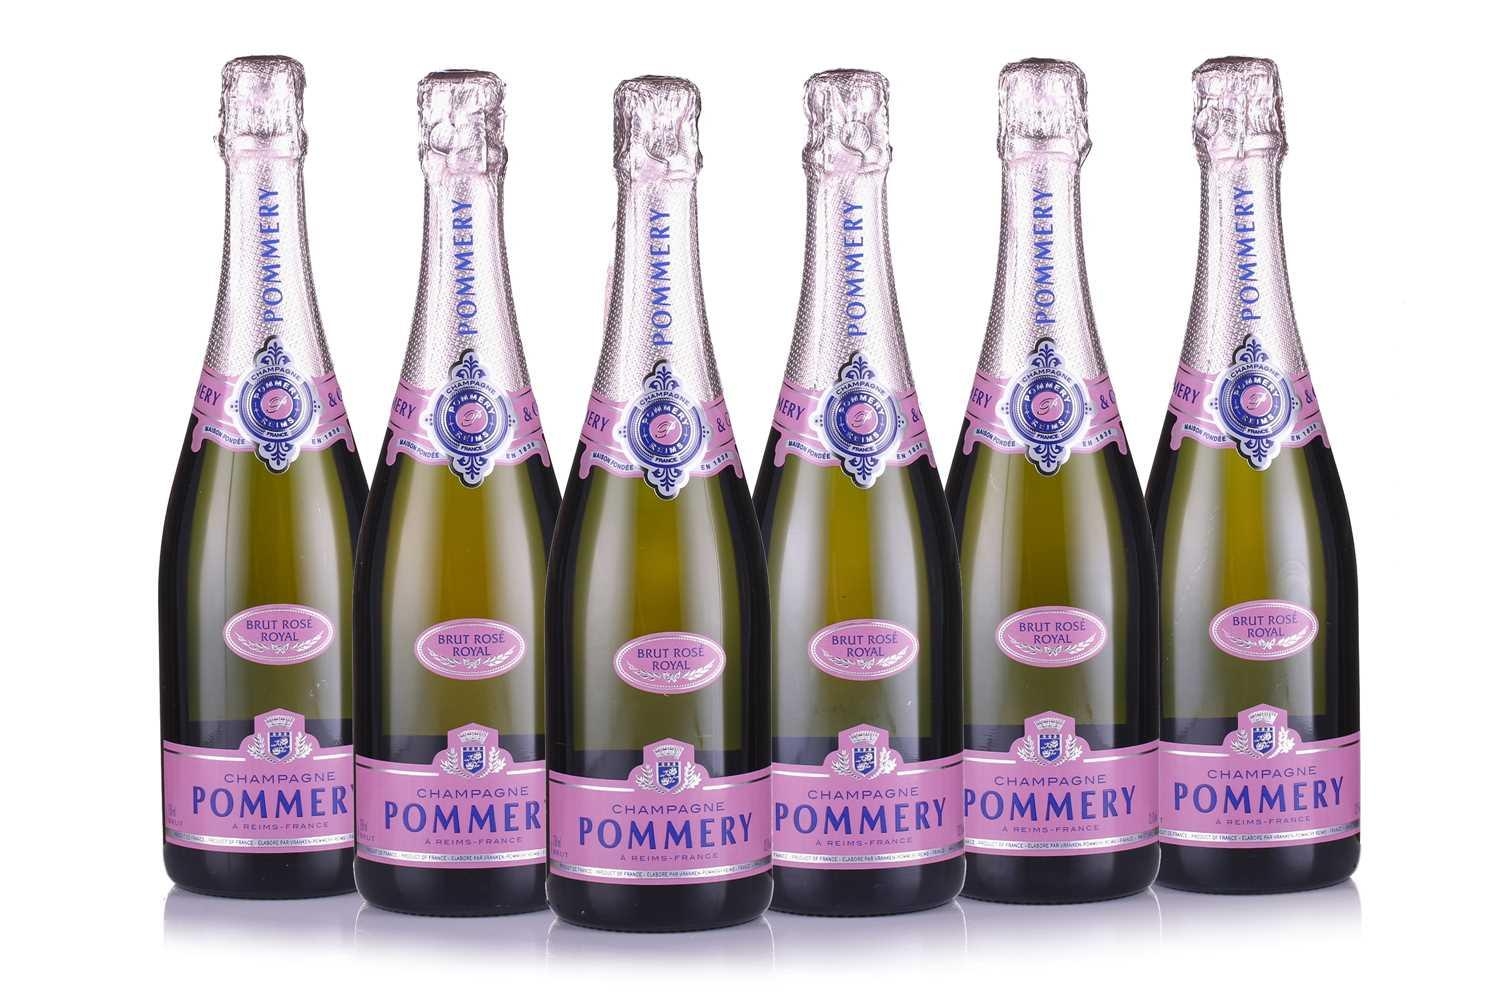 Six bottles of Pommery Rose Brut in (6) Royal Qty: cartons. Champagne